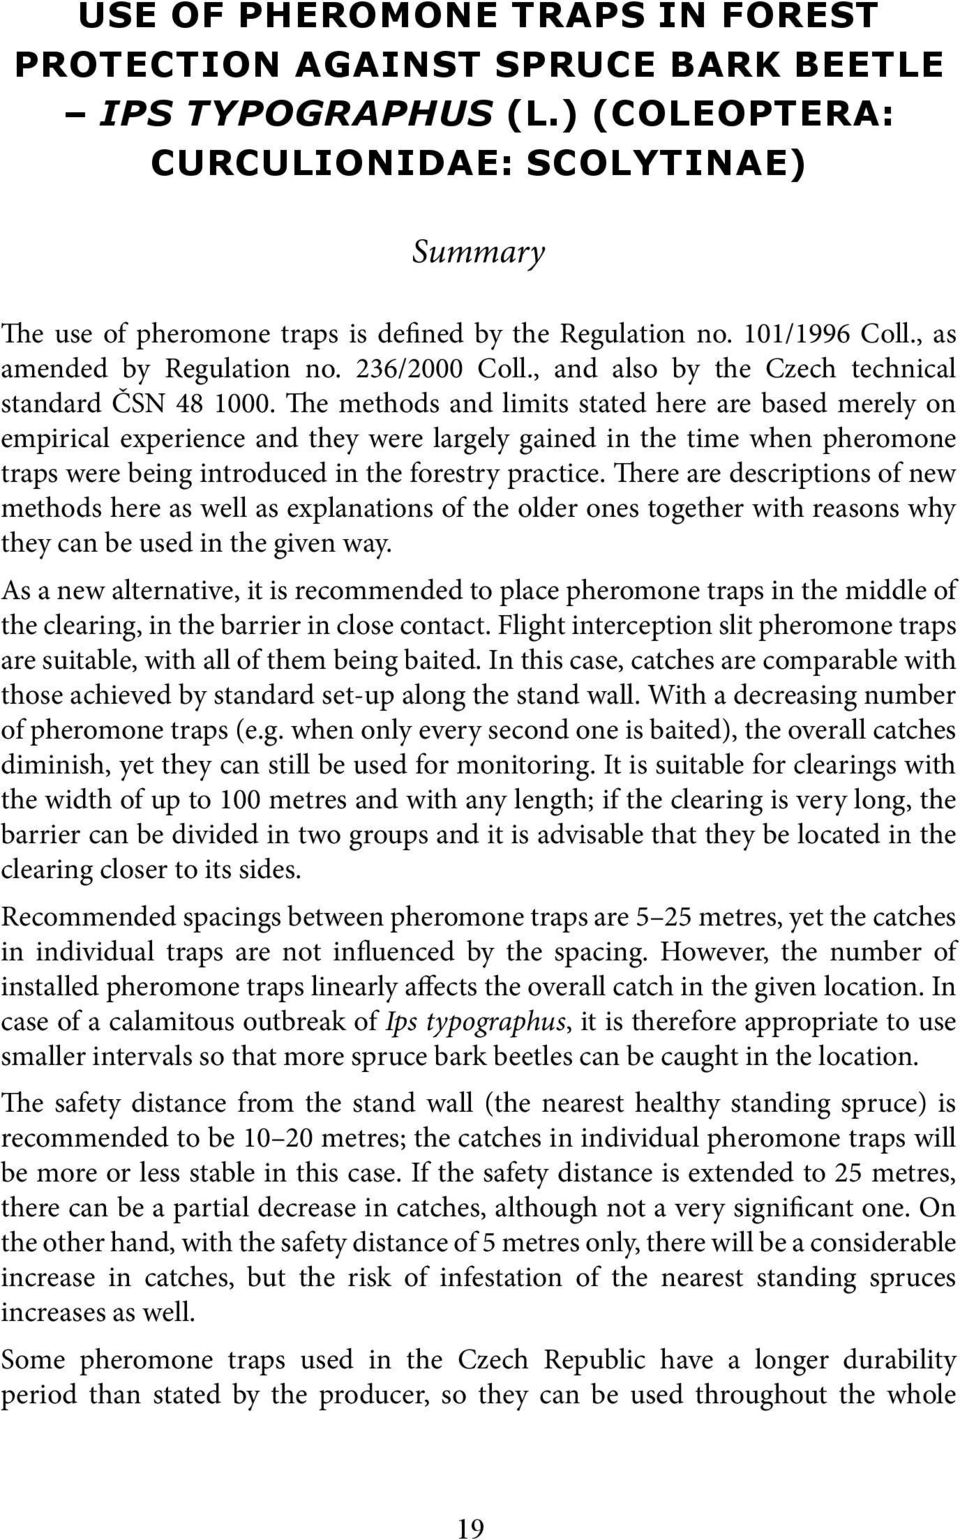 The methods and limits stated here are based merely on empirical experience and they were largely gained in the time when pheromone traps were being introduced in the forestry practice.